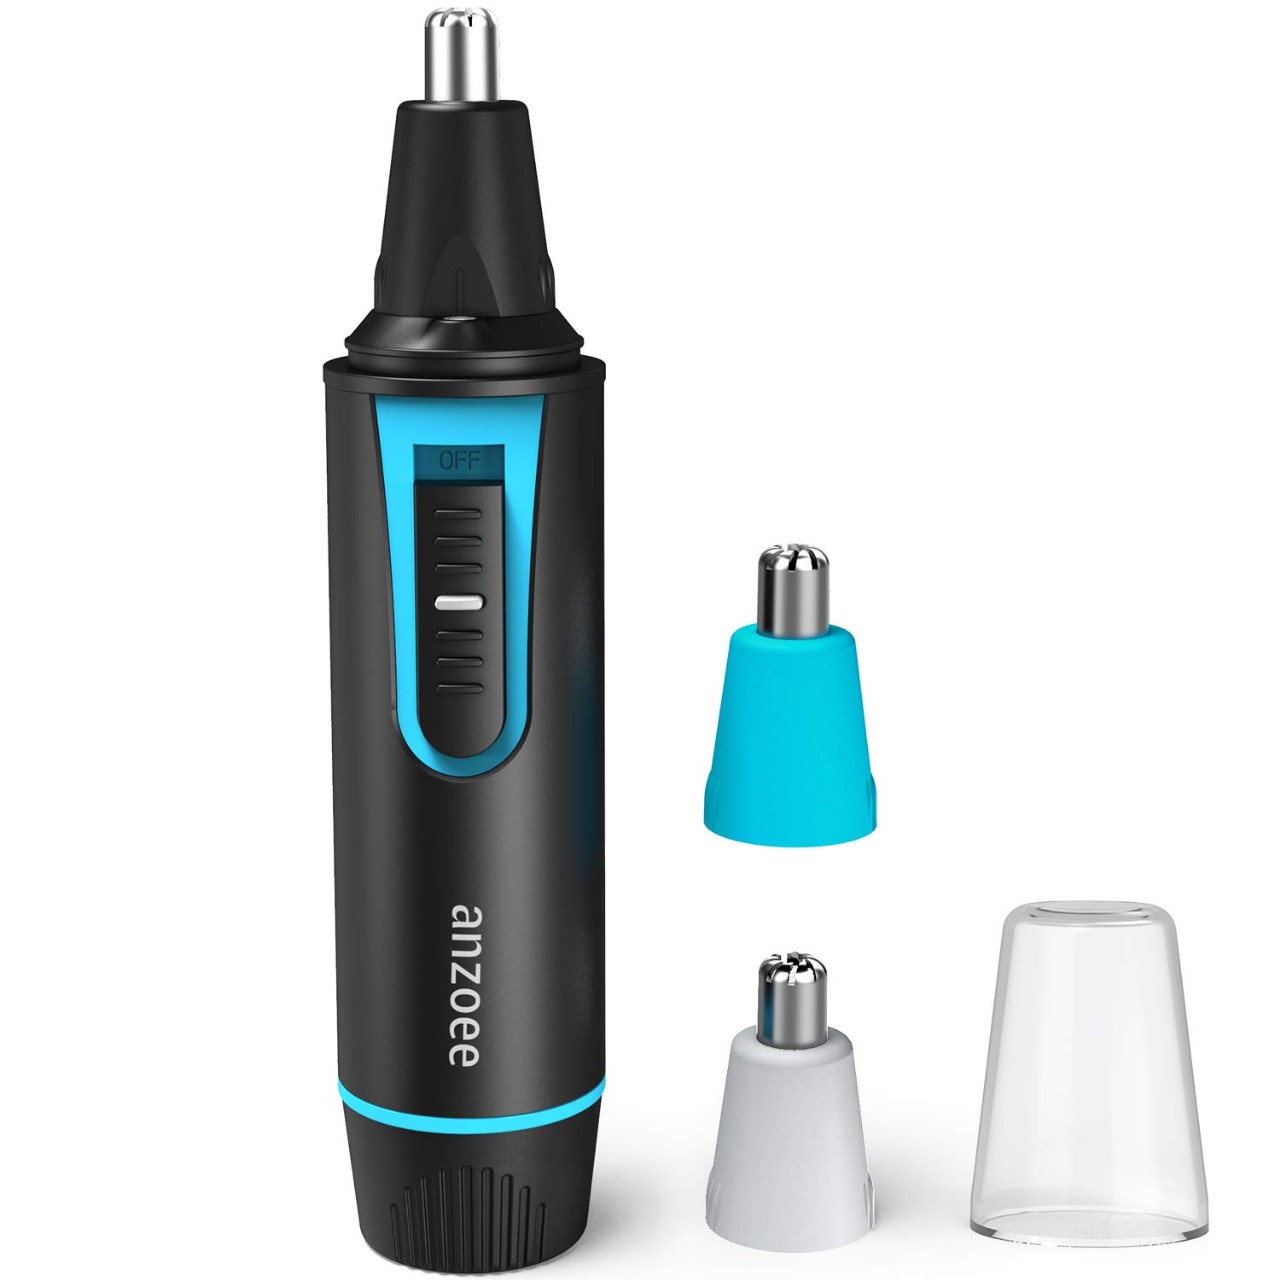 Nose Hair Trimmer for Men and Wowen, anzoee Electric Ear Hair Trimmer with 2 Replacement Blades